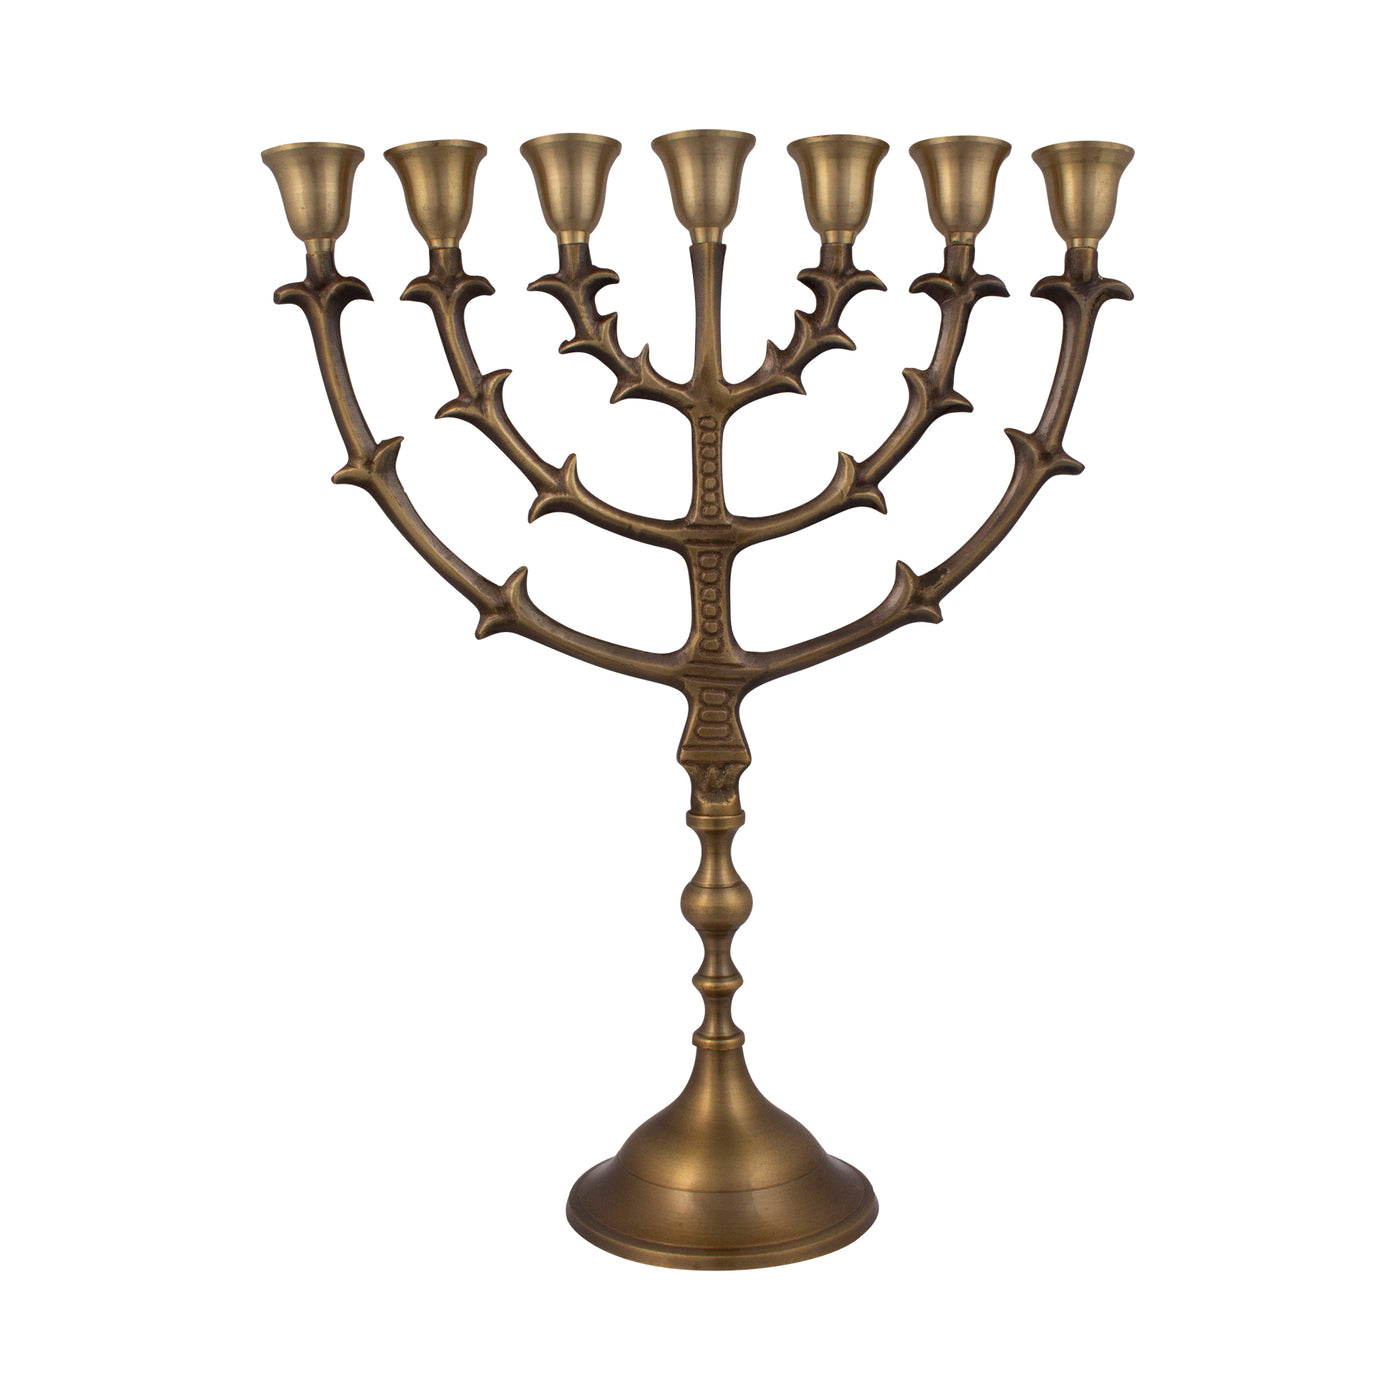 Menorah 7 Branch Menorah  Antique Replica Solid bronze 12" inches Bronze 7 Branches Menorah Candle Holder from Israel